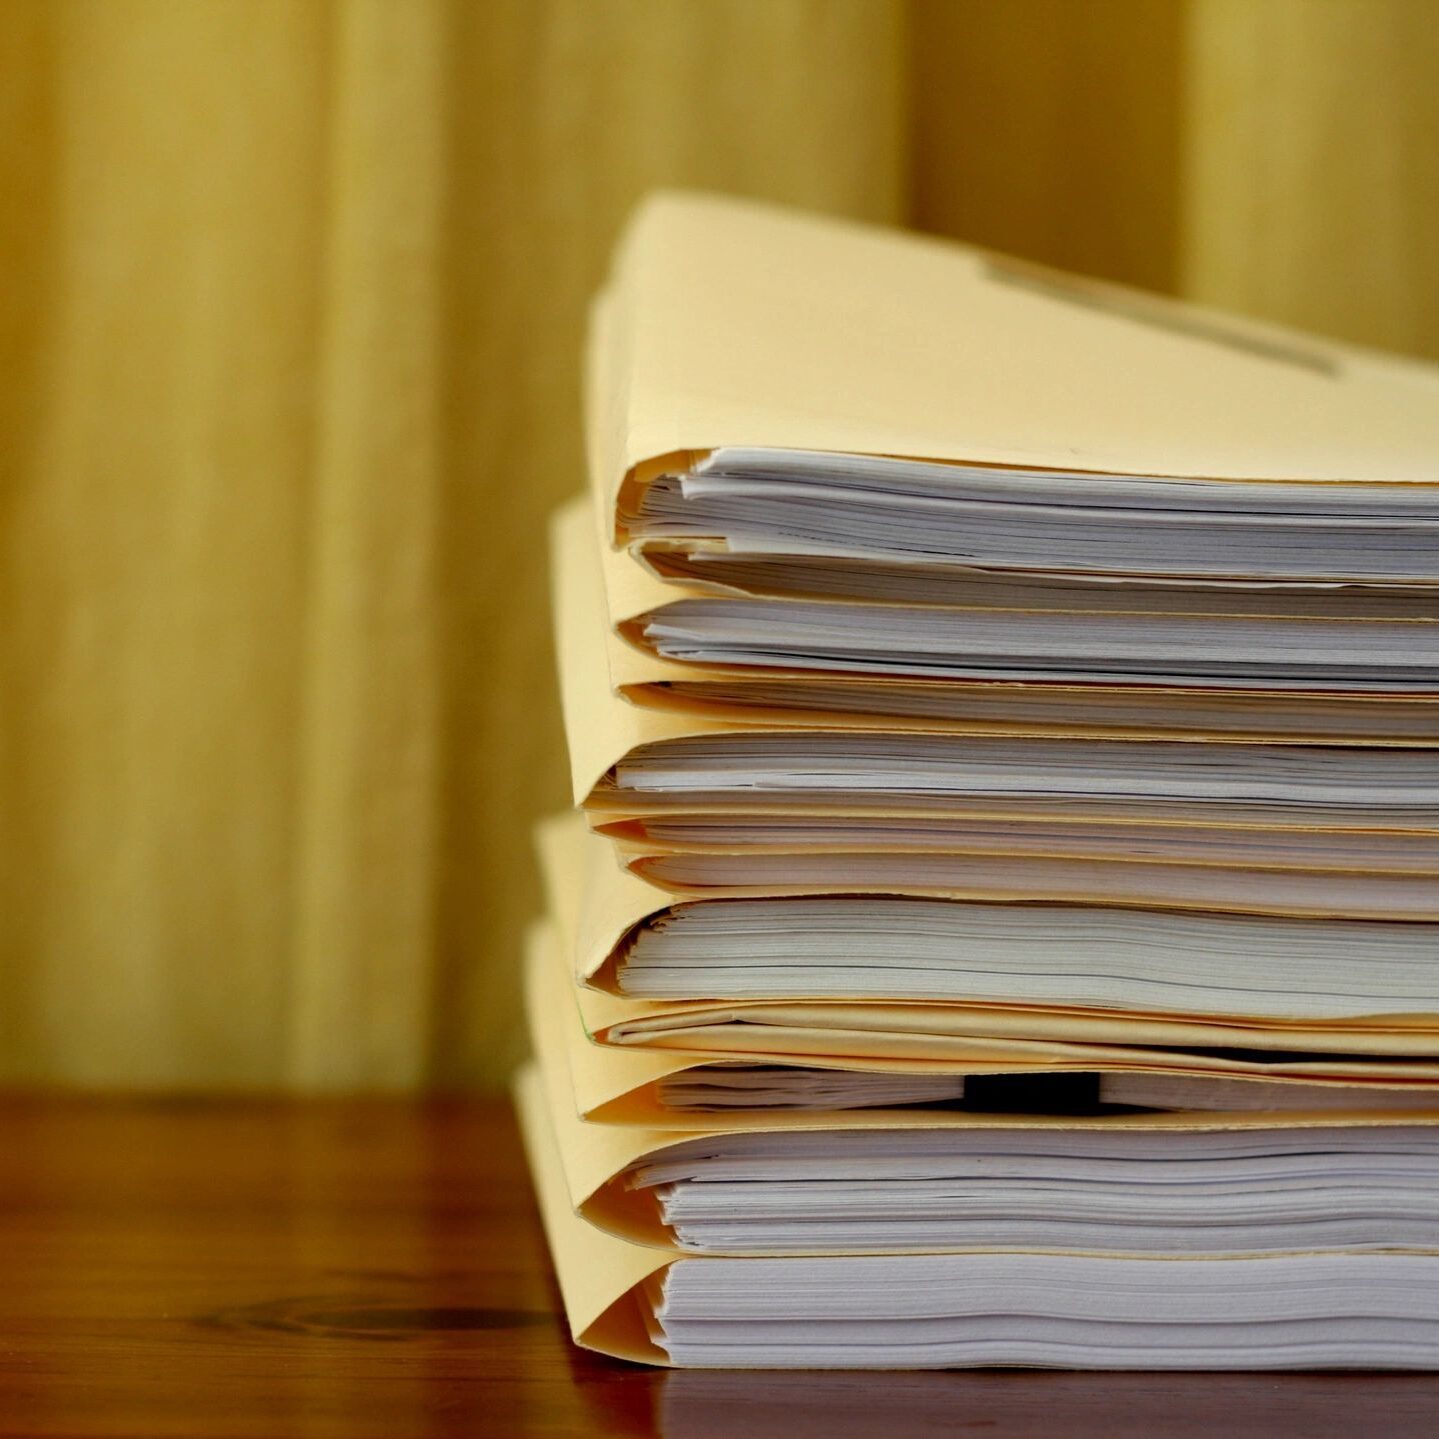 A stack of papers sitting on top of a wooden table.